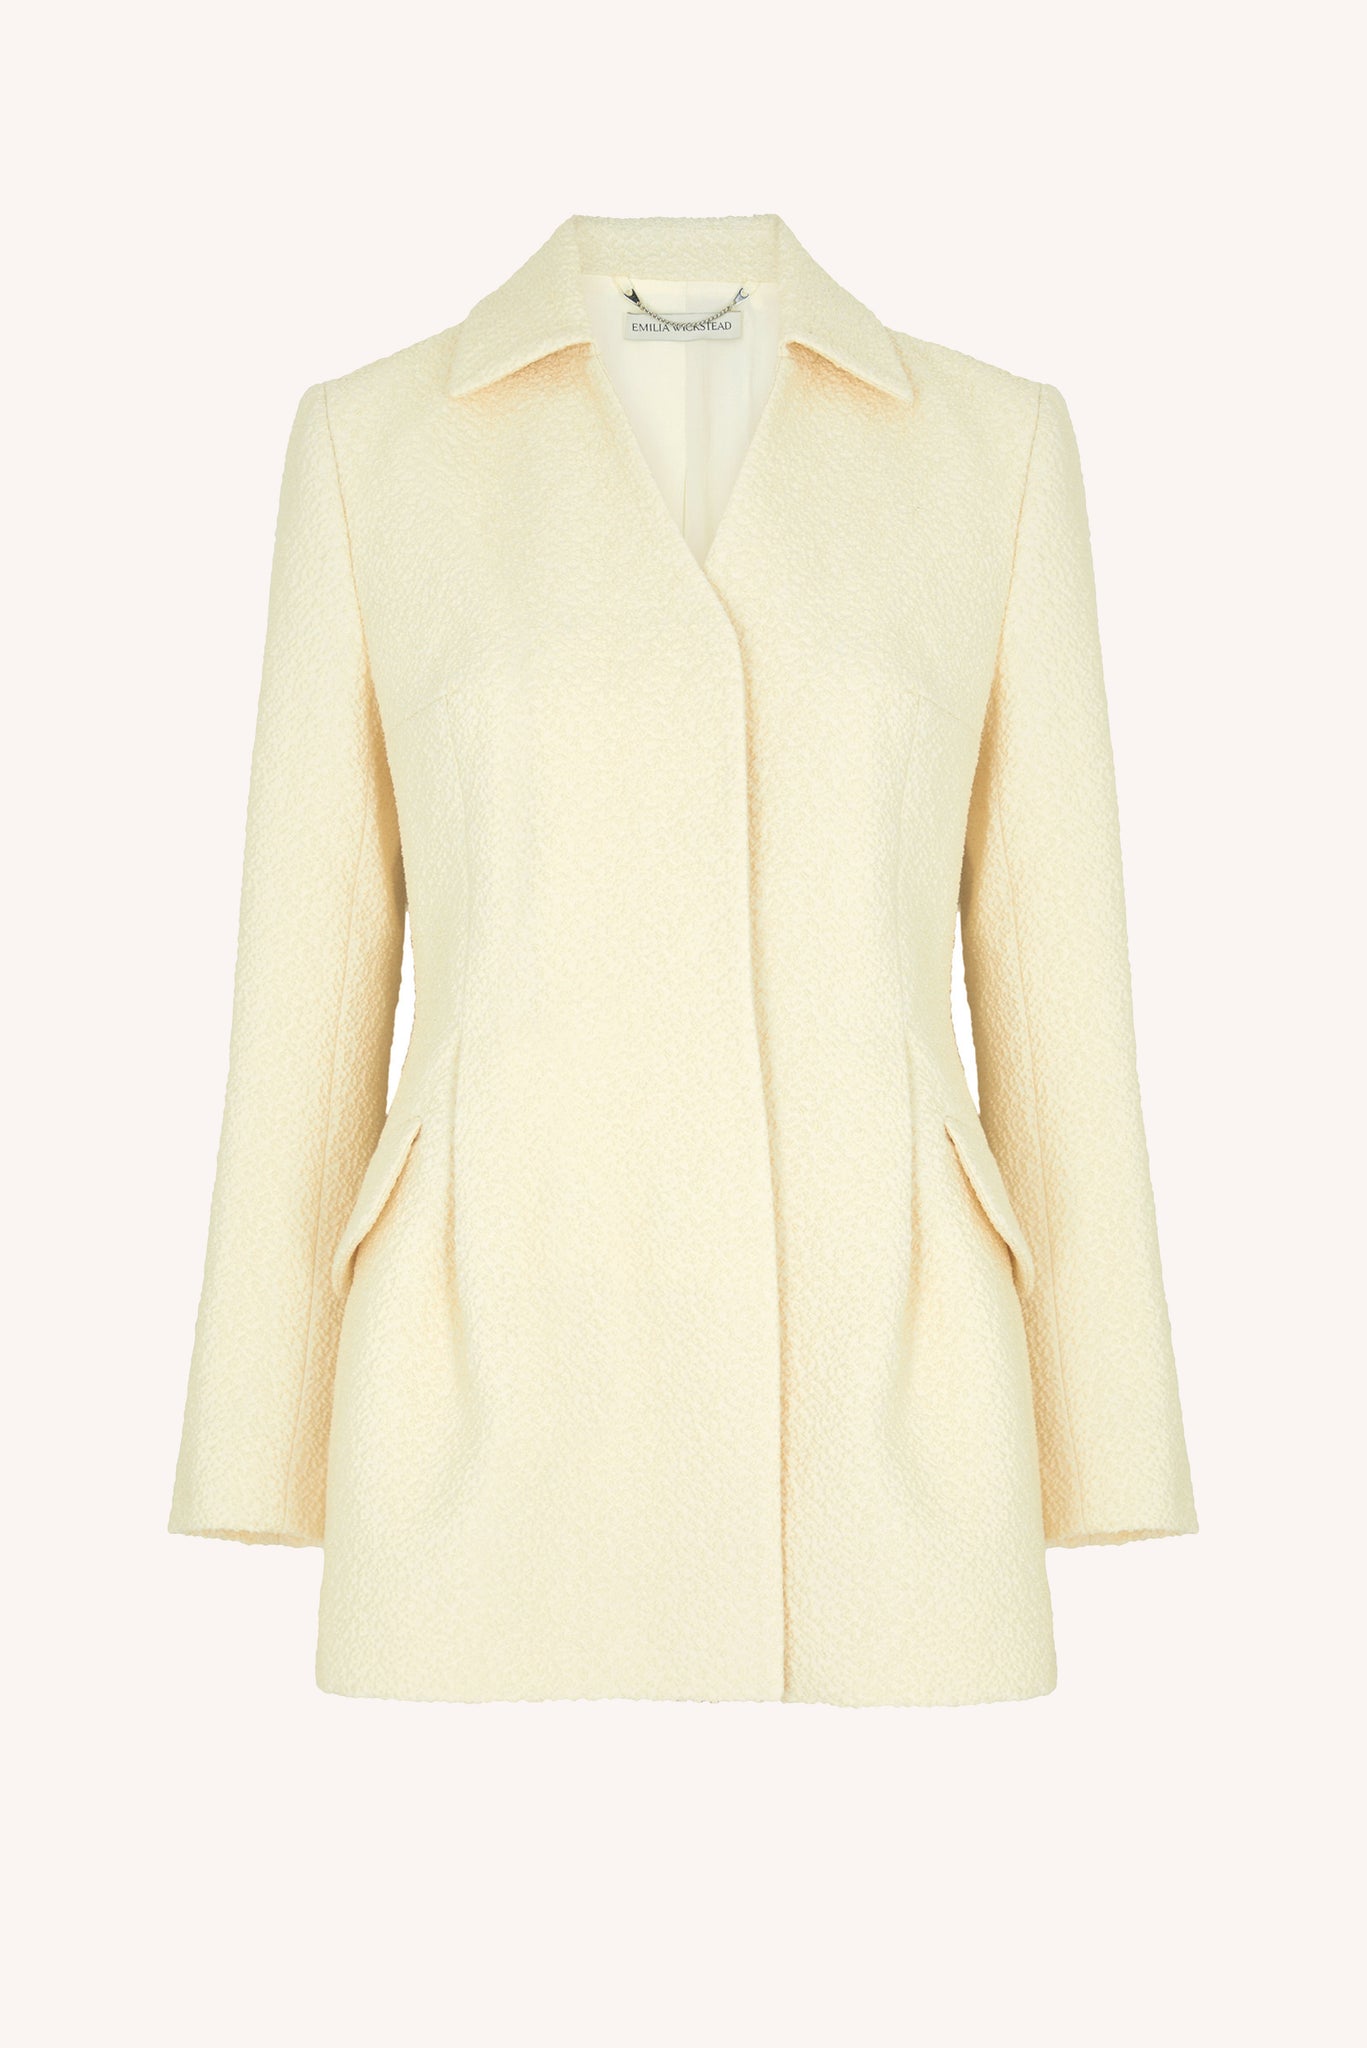 Aideen Ivory Cotton Boucle Jacket